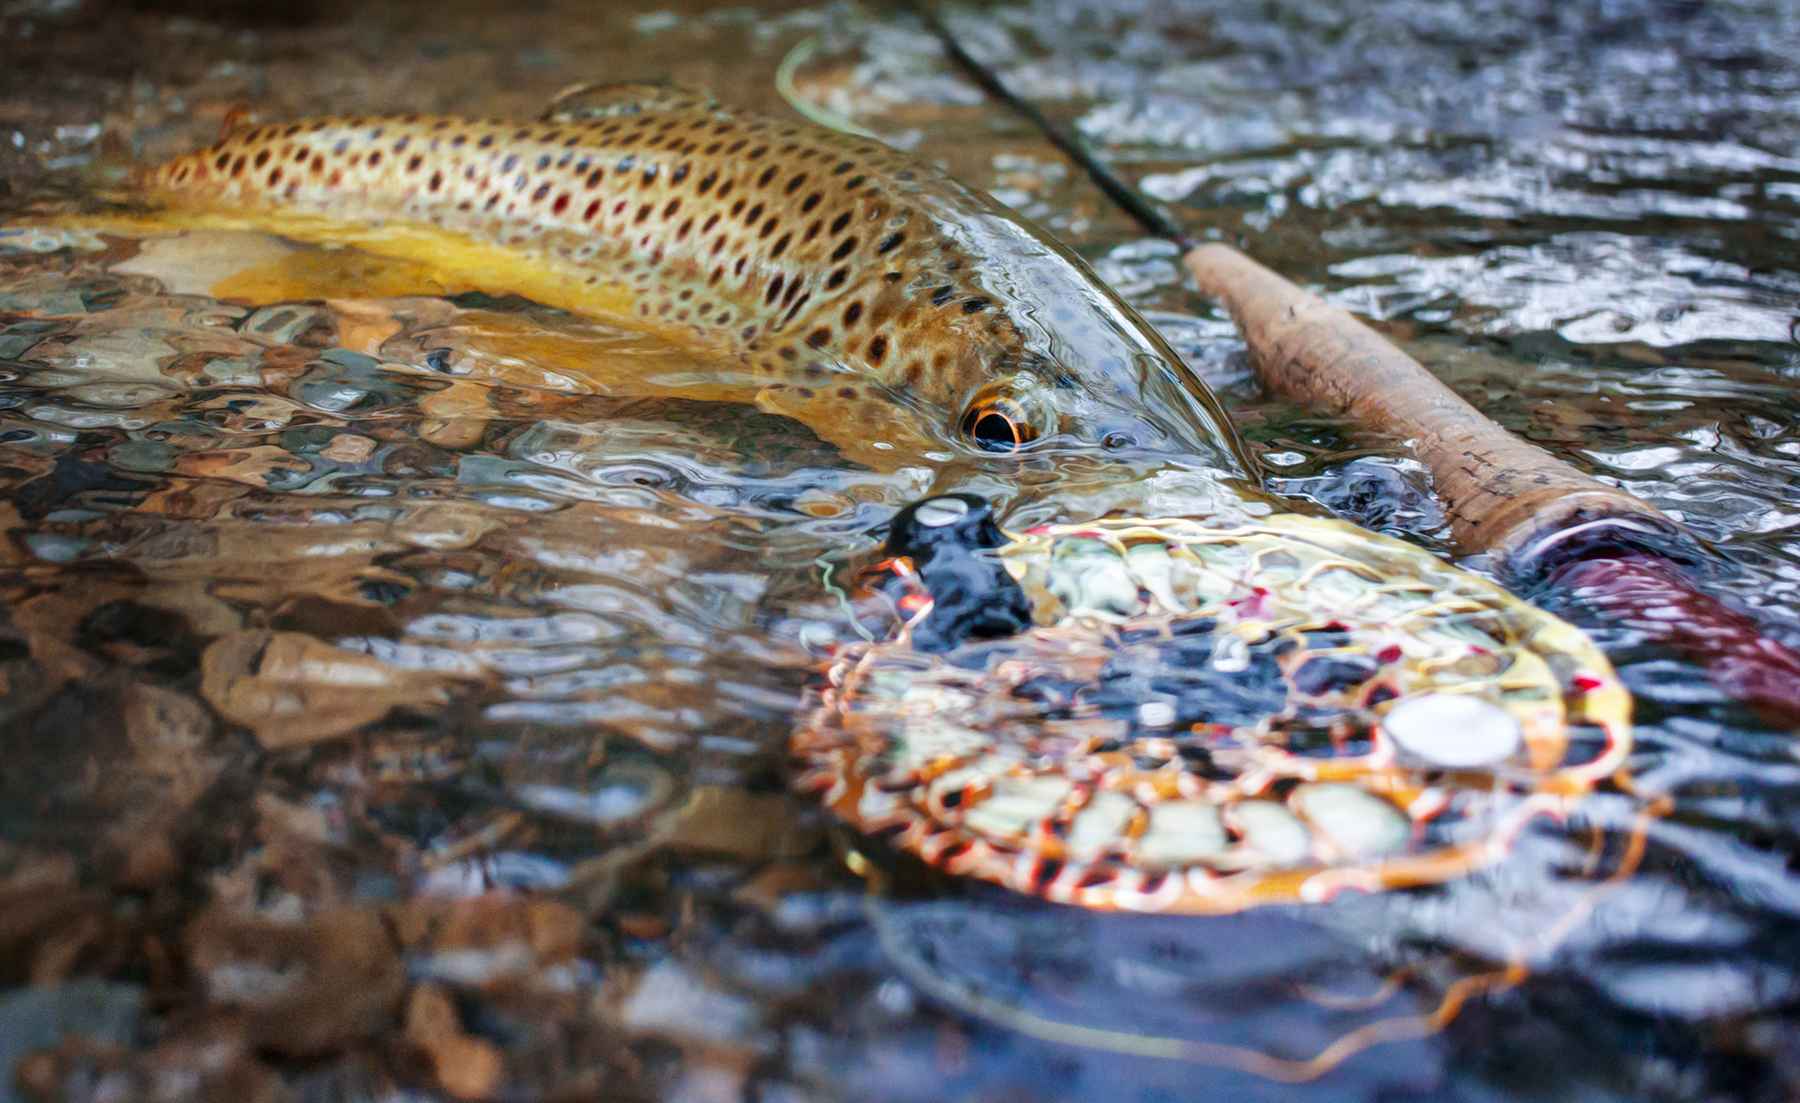 2014 Fly Fishing Photo Contest: The Winners | Hatch Magazine - Fly Fishing, etc.